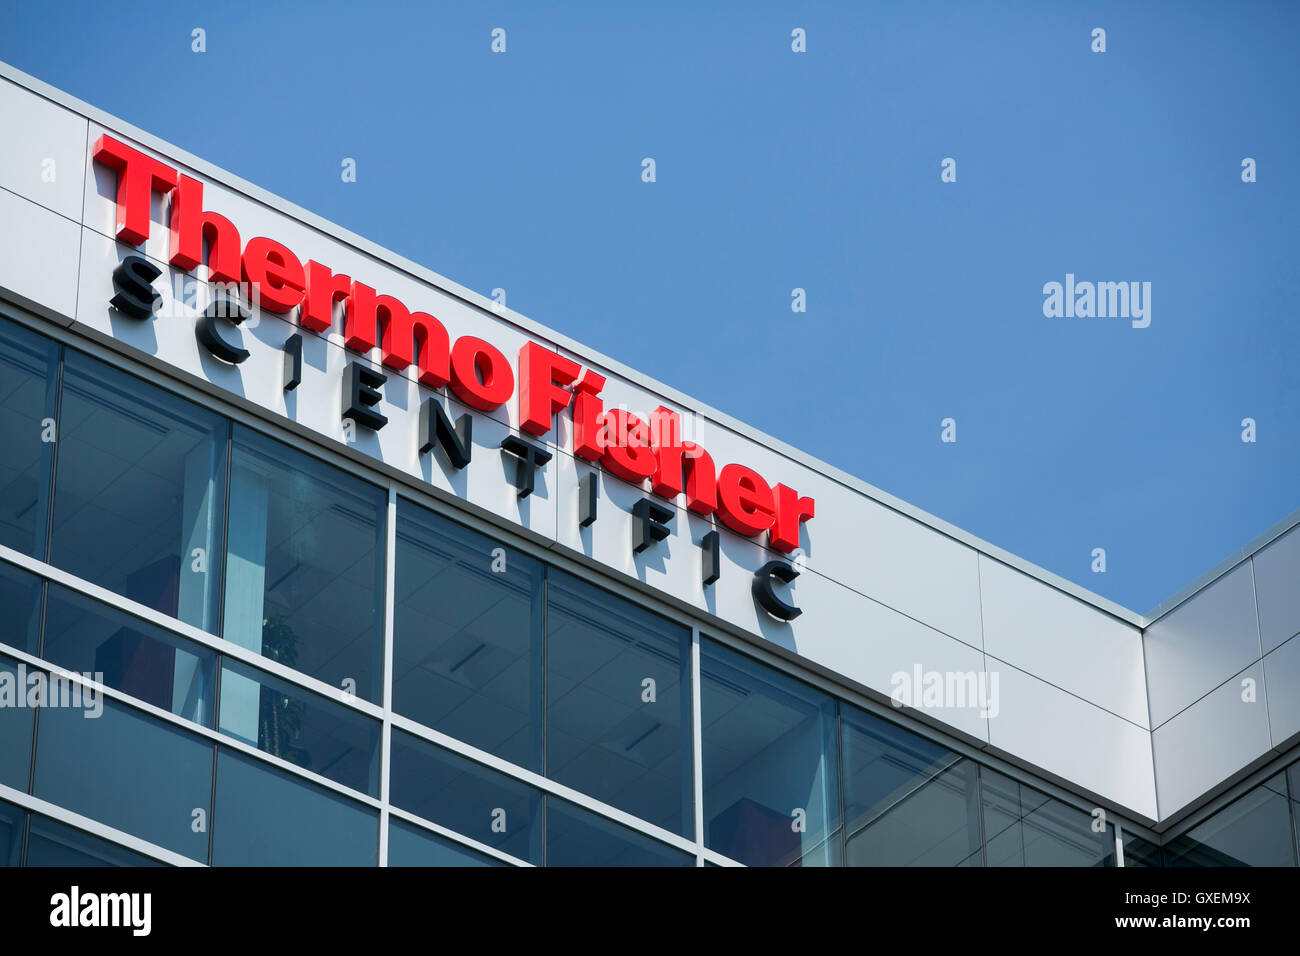 A logo sign outside of the headquarters of Thermo Fisher Scientific in Waltham, Massachusetts on August 13, 2016. Stock Photo